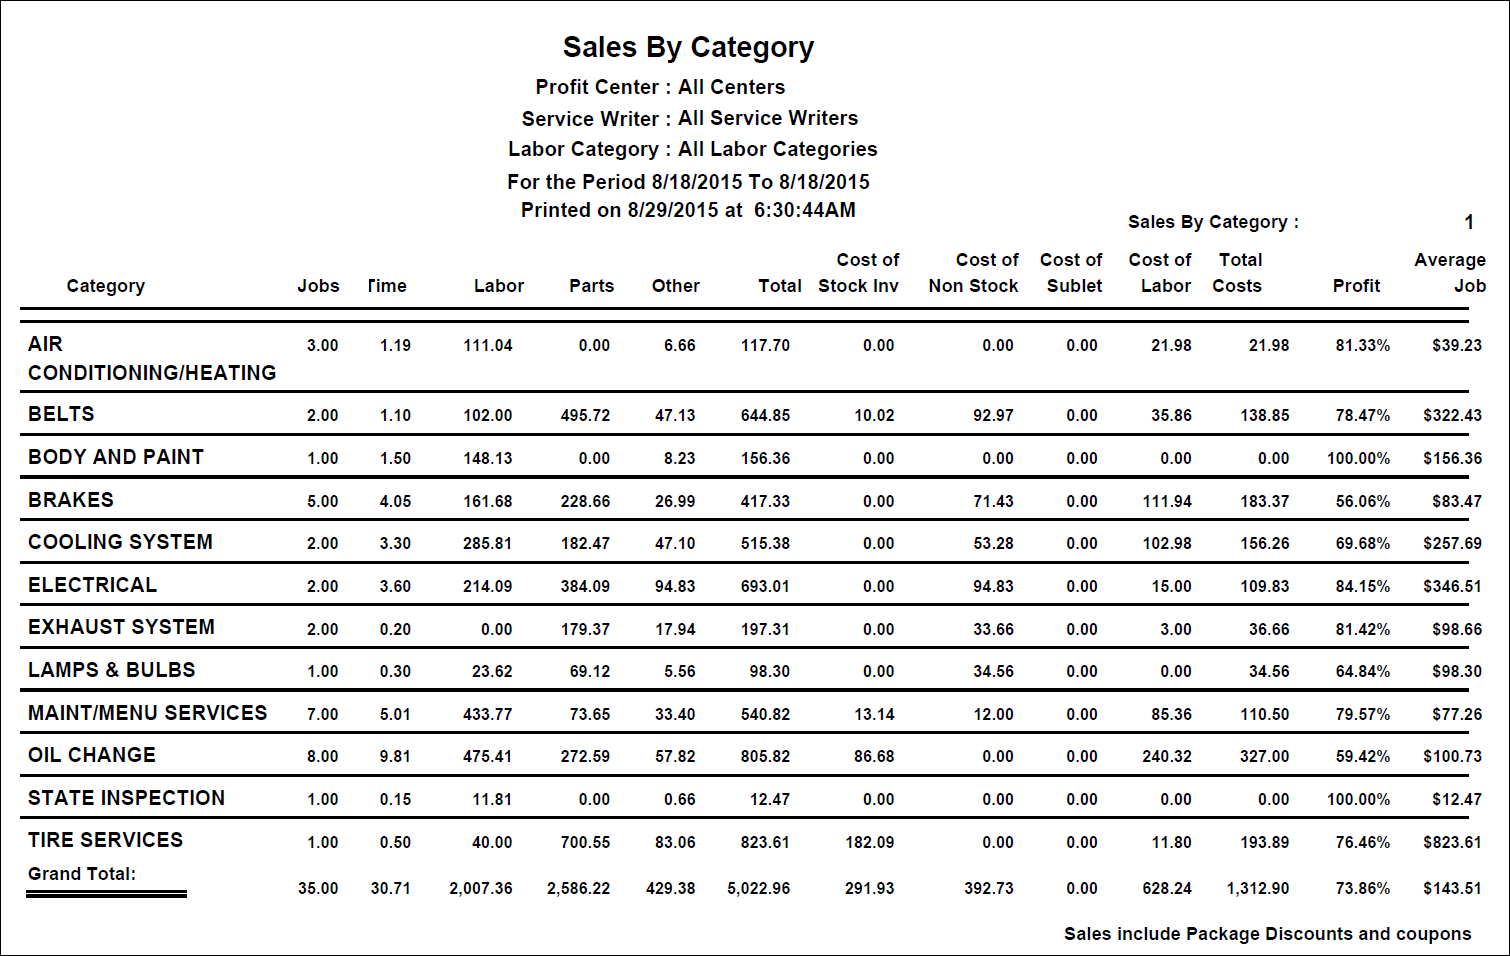 The Sales by Category report.